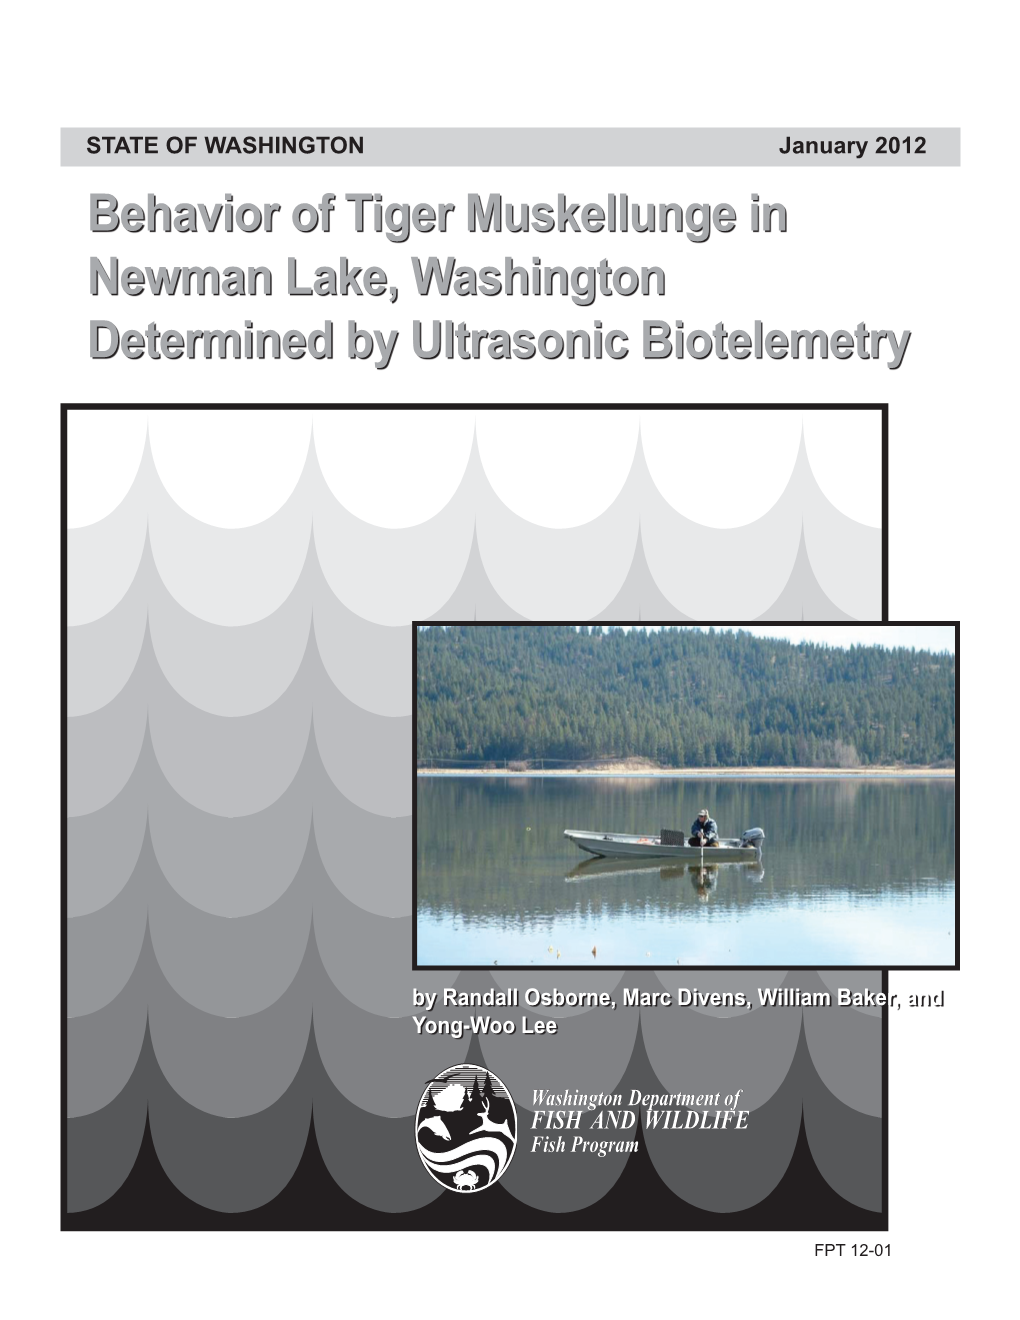 Behavior of Tiger Muskellunge in Newman Lake, Washington Determined by Ultrasonic Biotelemetry